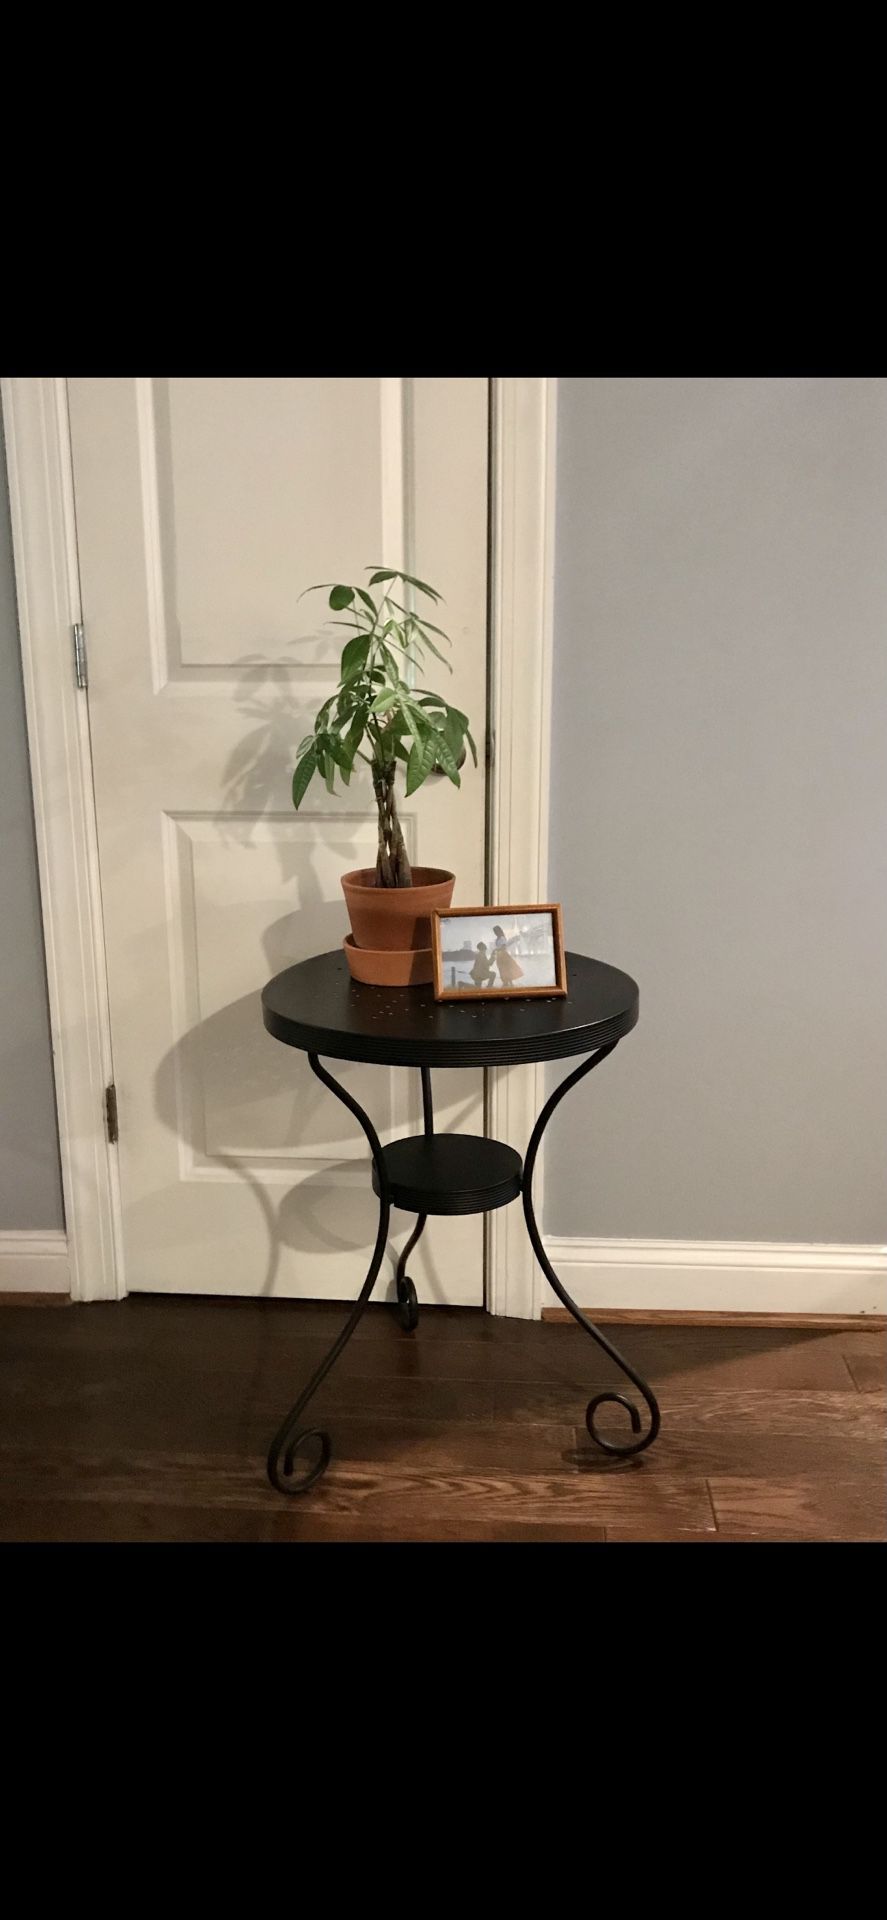 Black metal plant stand, patio table, o rend table